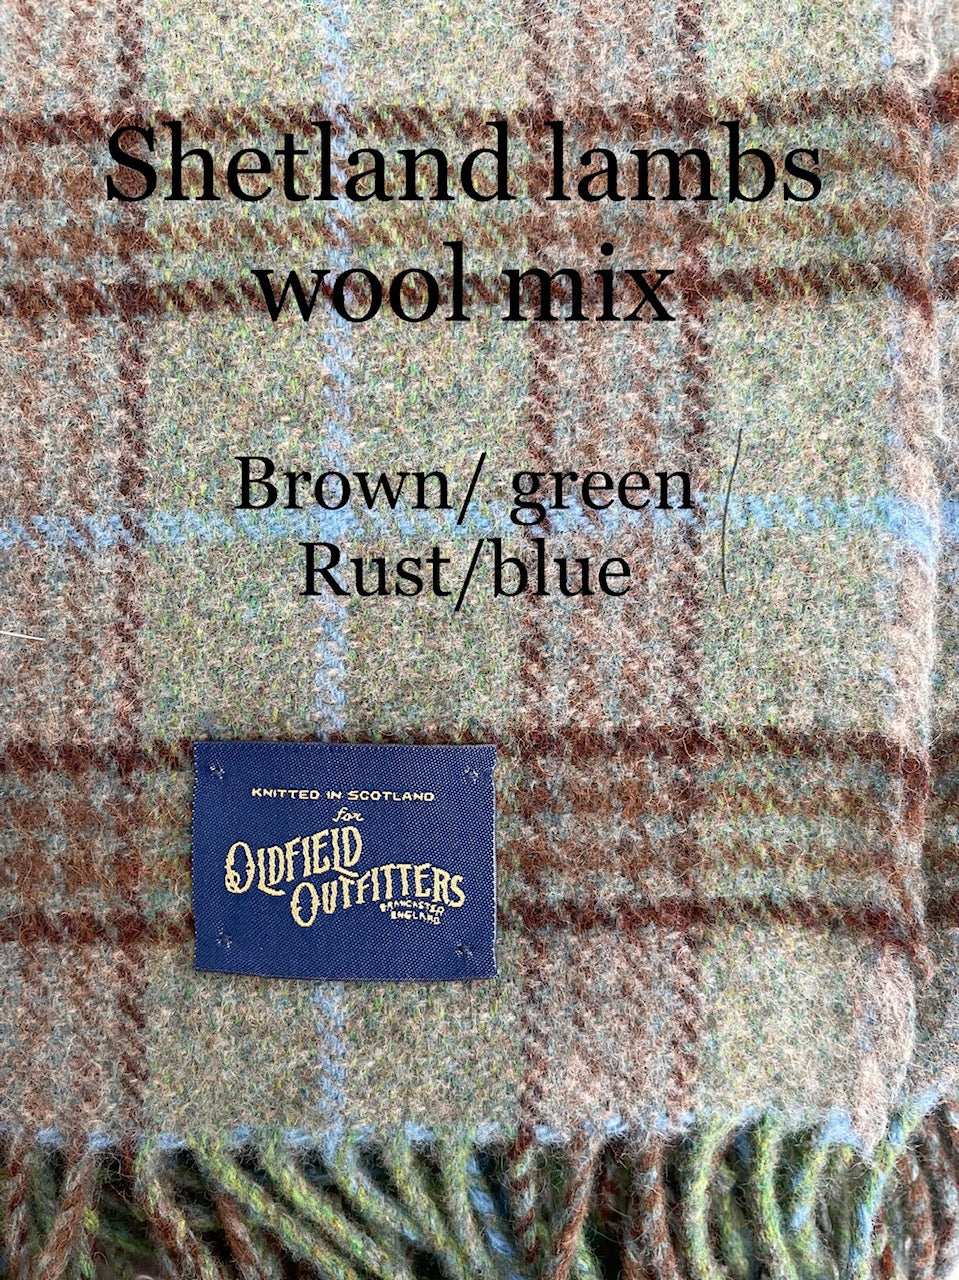 Shetland wool Blanket with English Crafted Vintage leather handle and straps